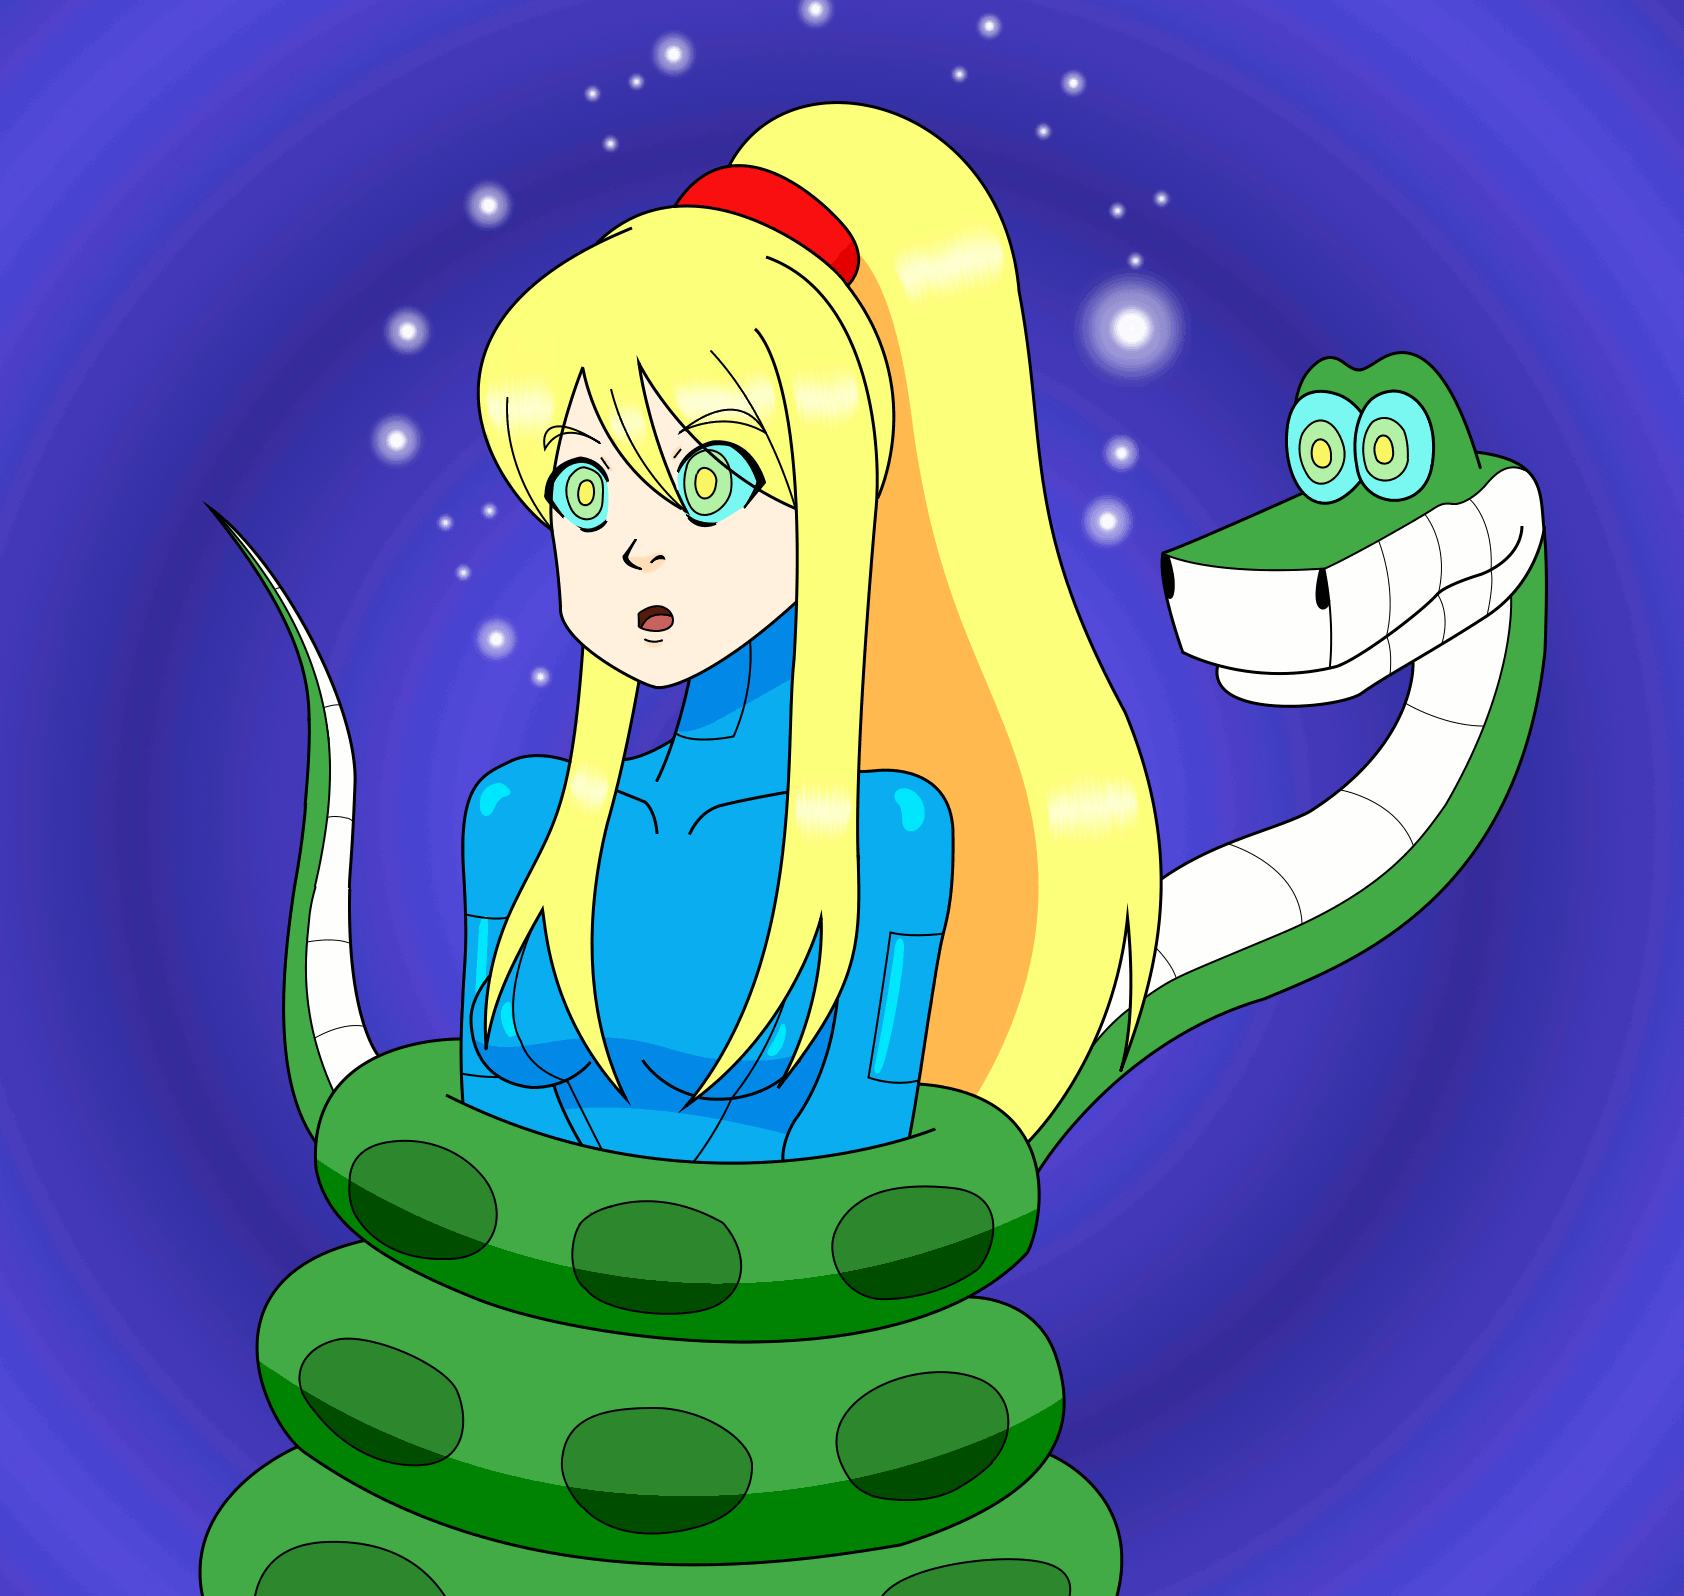 python wrapping girl in coils